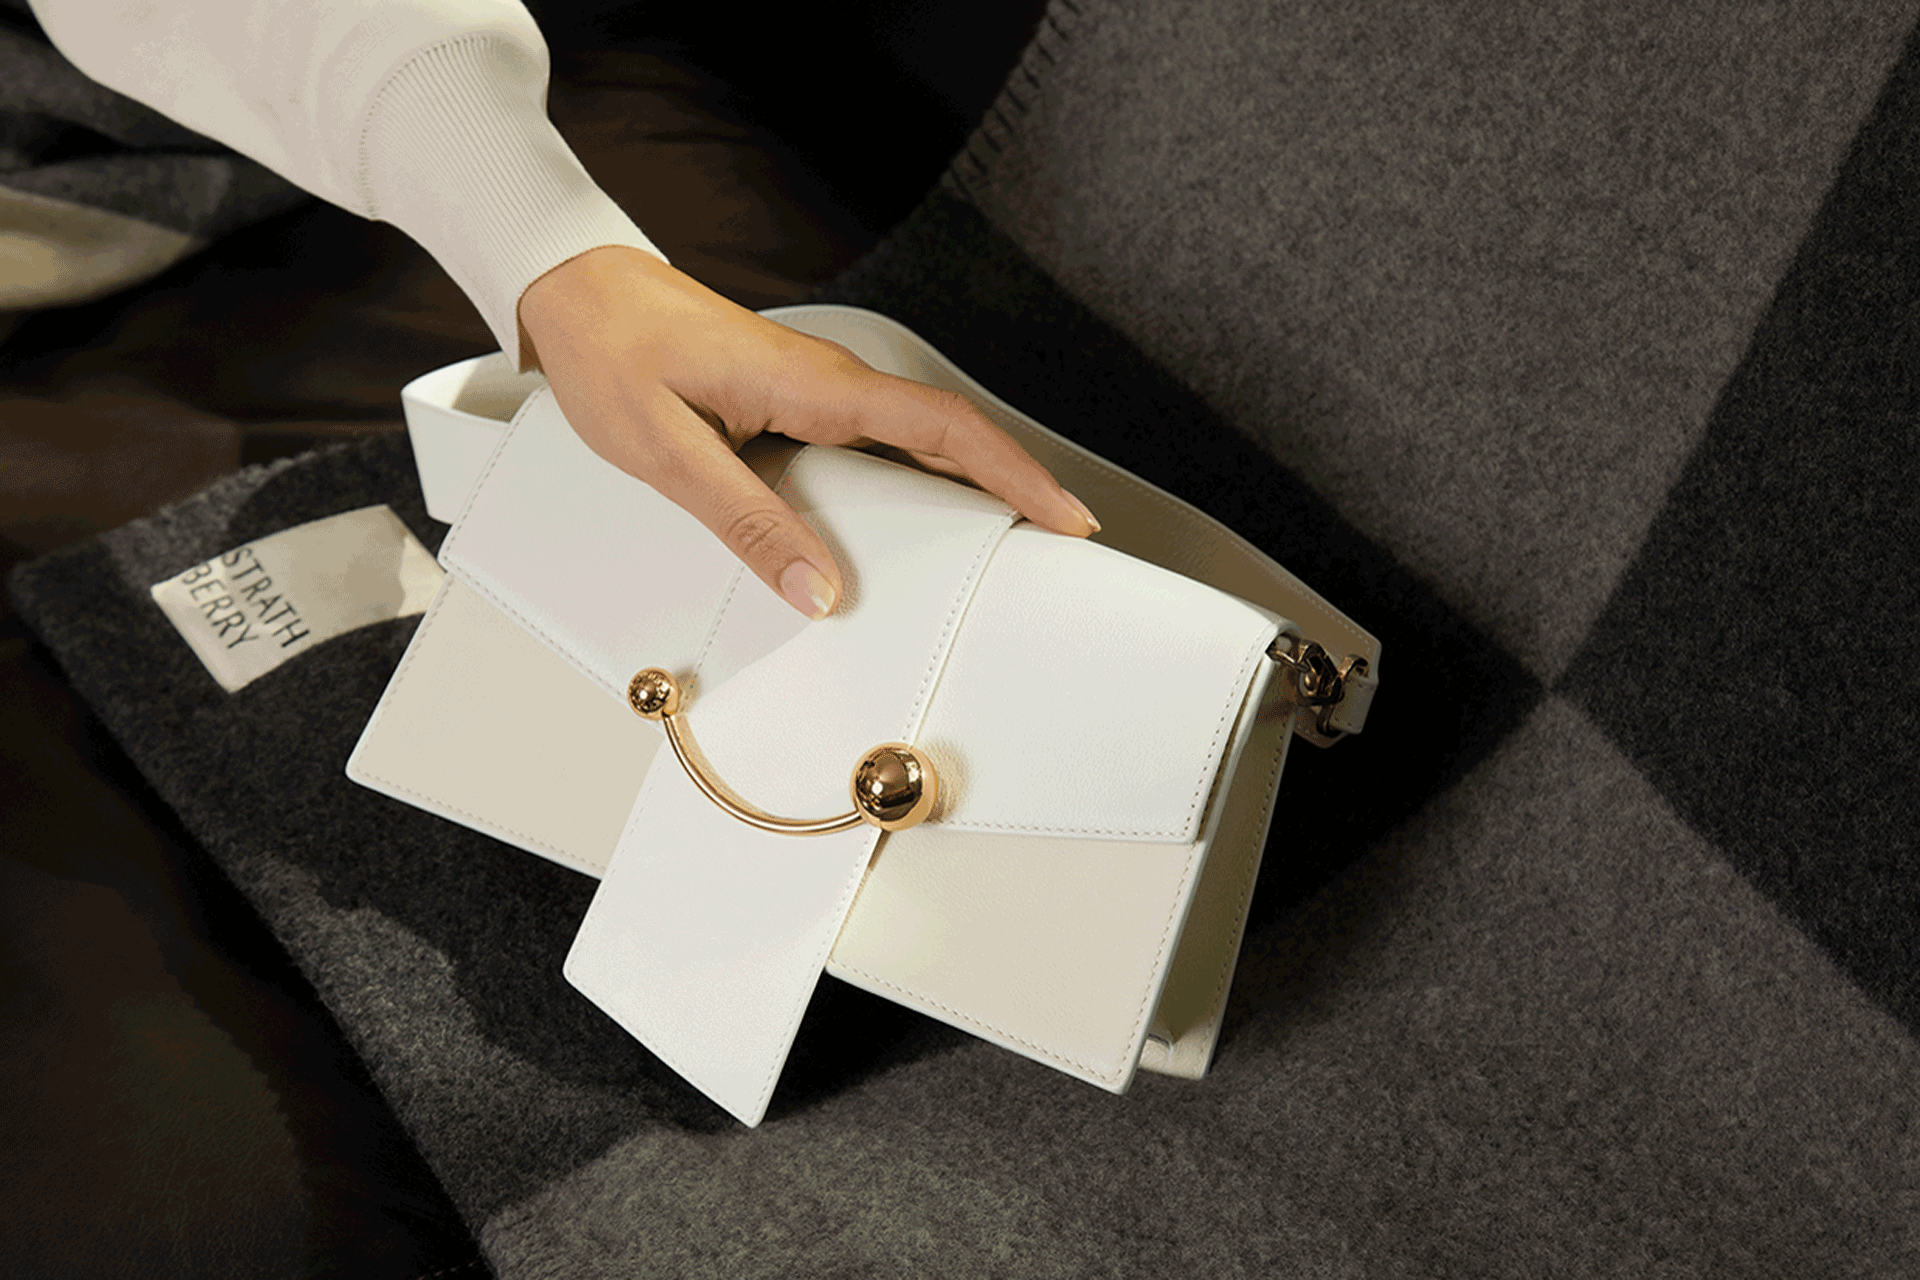 White leather Strathberry bag with a gold clasp.